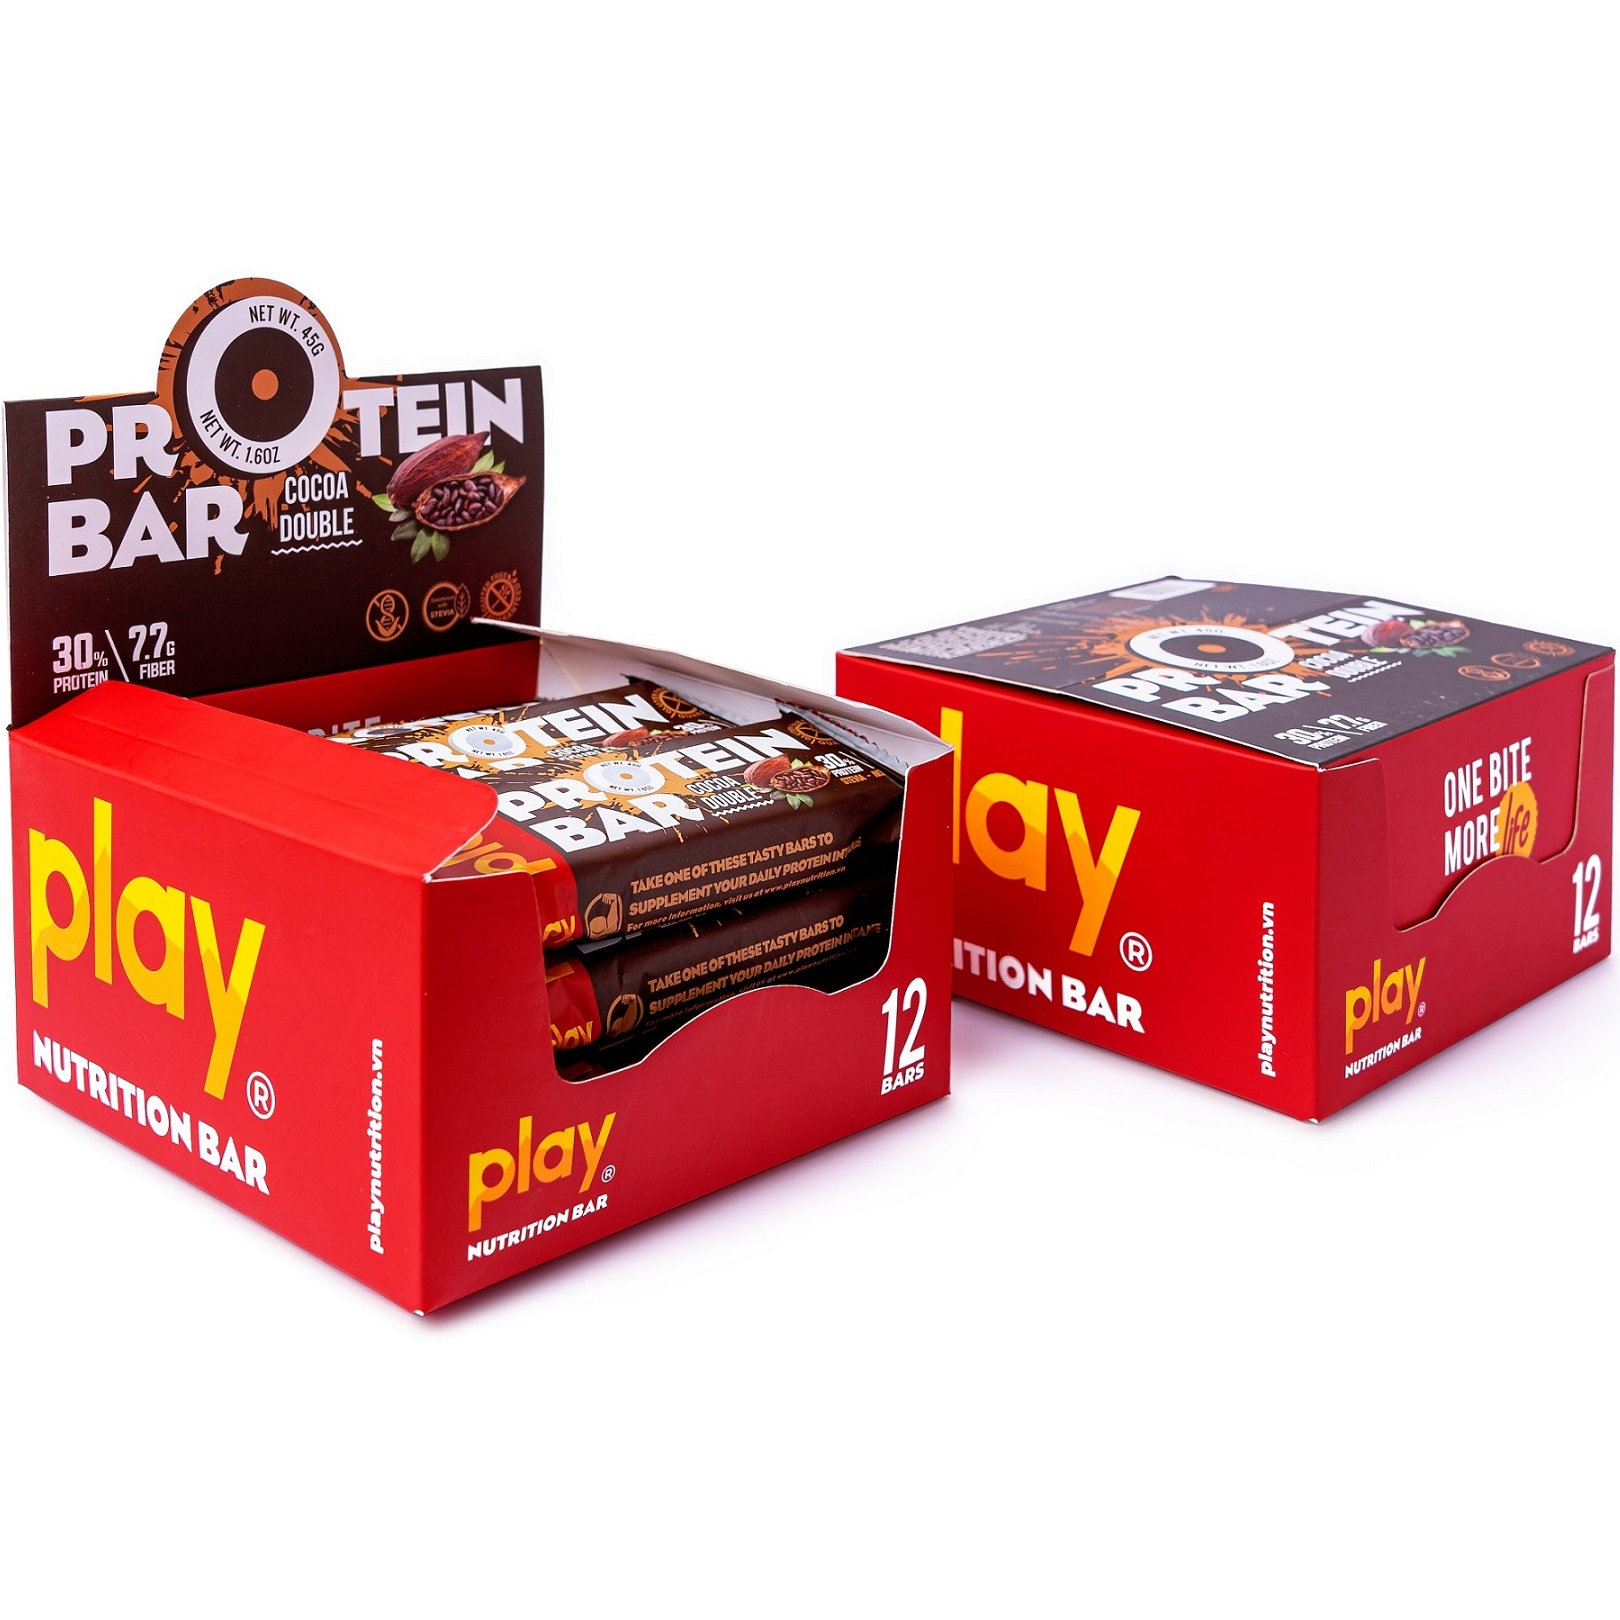 Hộp 12 Thanh Protein PLAY Vị Cacao